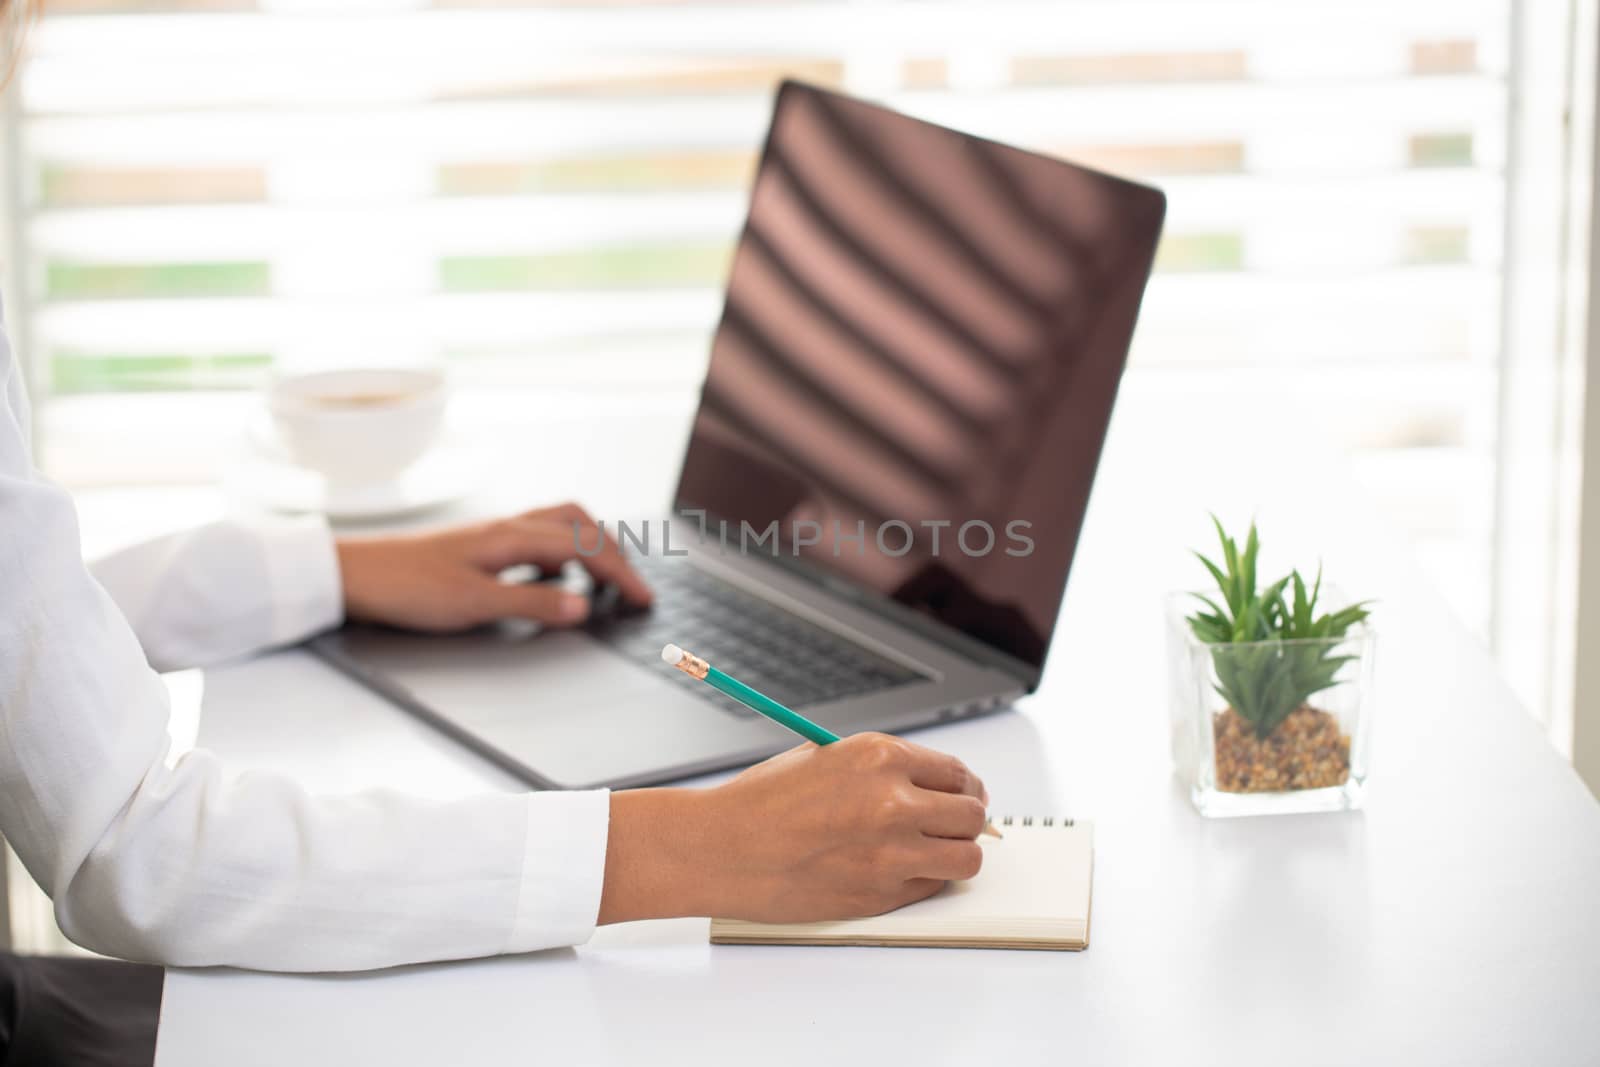 Business people work Laptop screen The hand is taking notes Office room. Online marketing concepts, adult education, e-learning Office work process Online training. Marketing accounting.